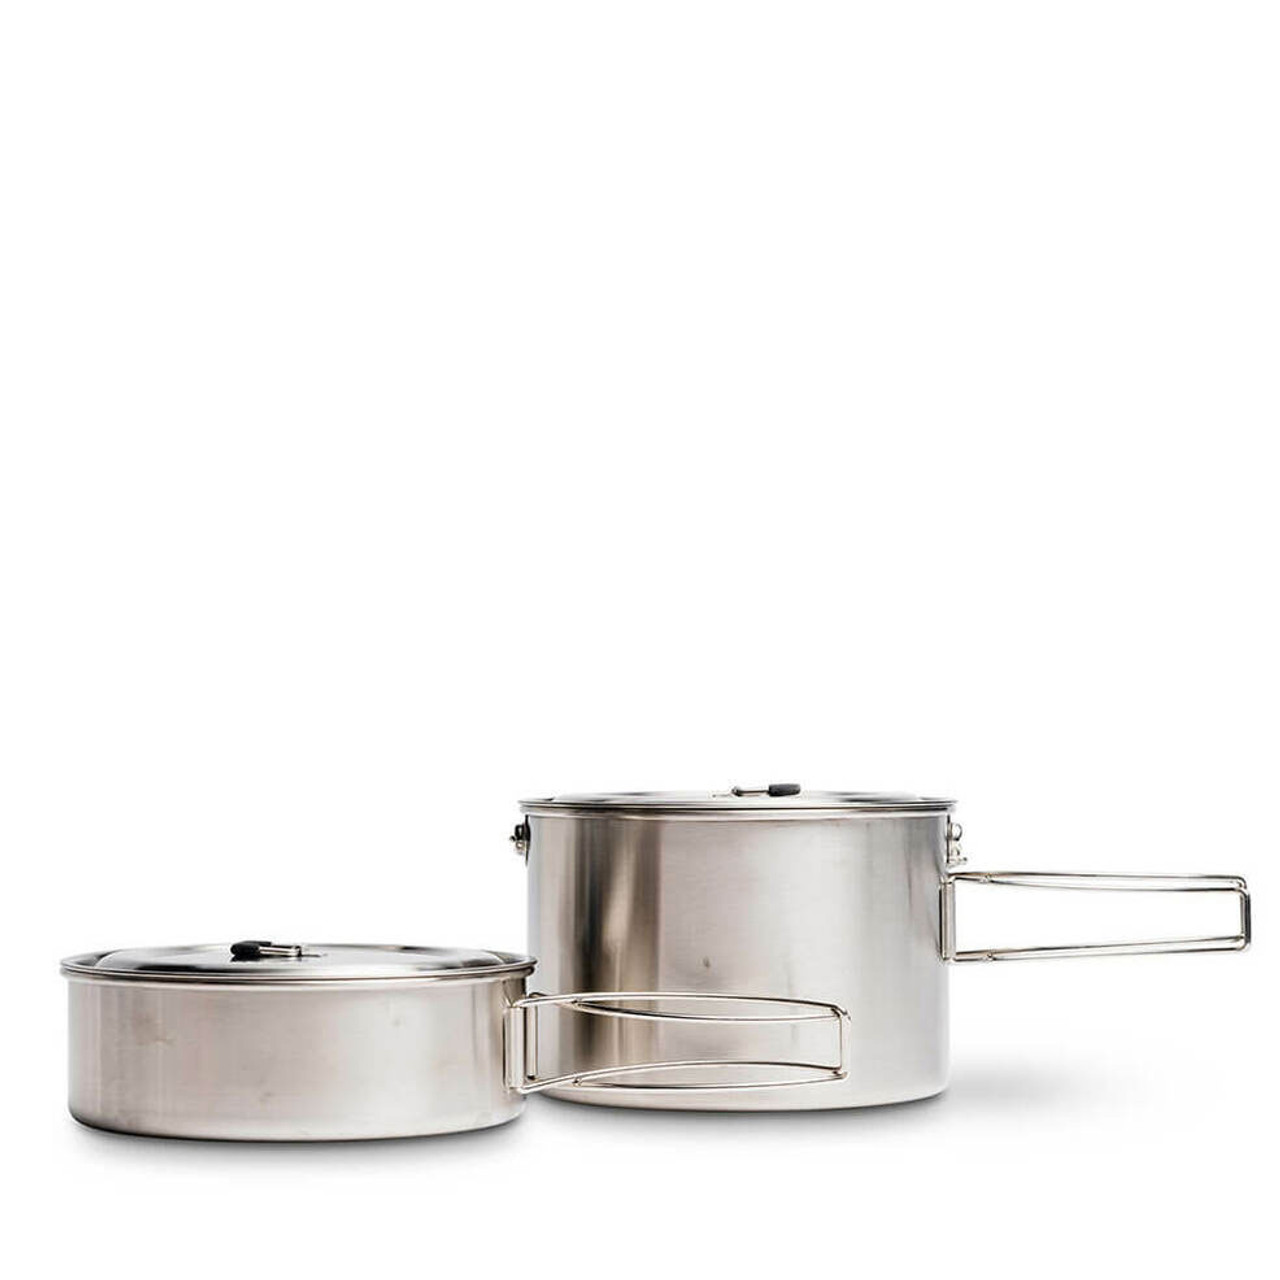 Solo Stove Stainless Steel Pot 4000